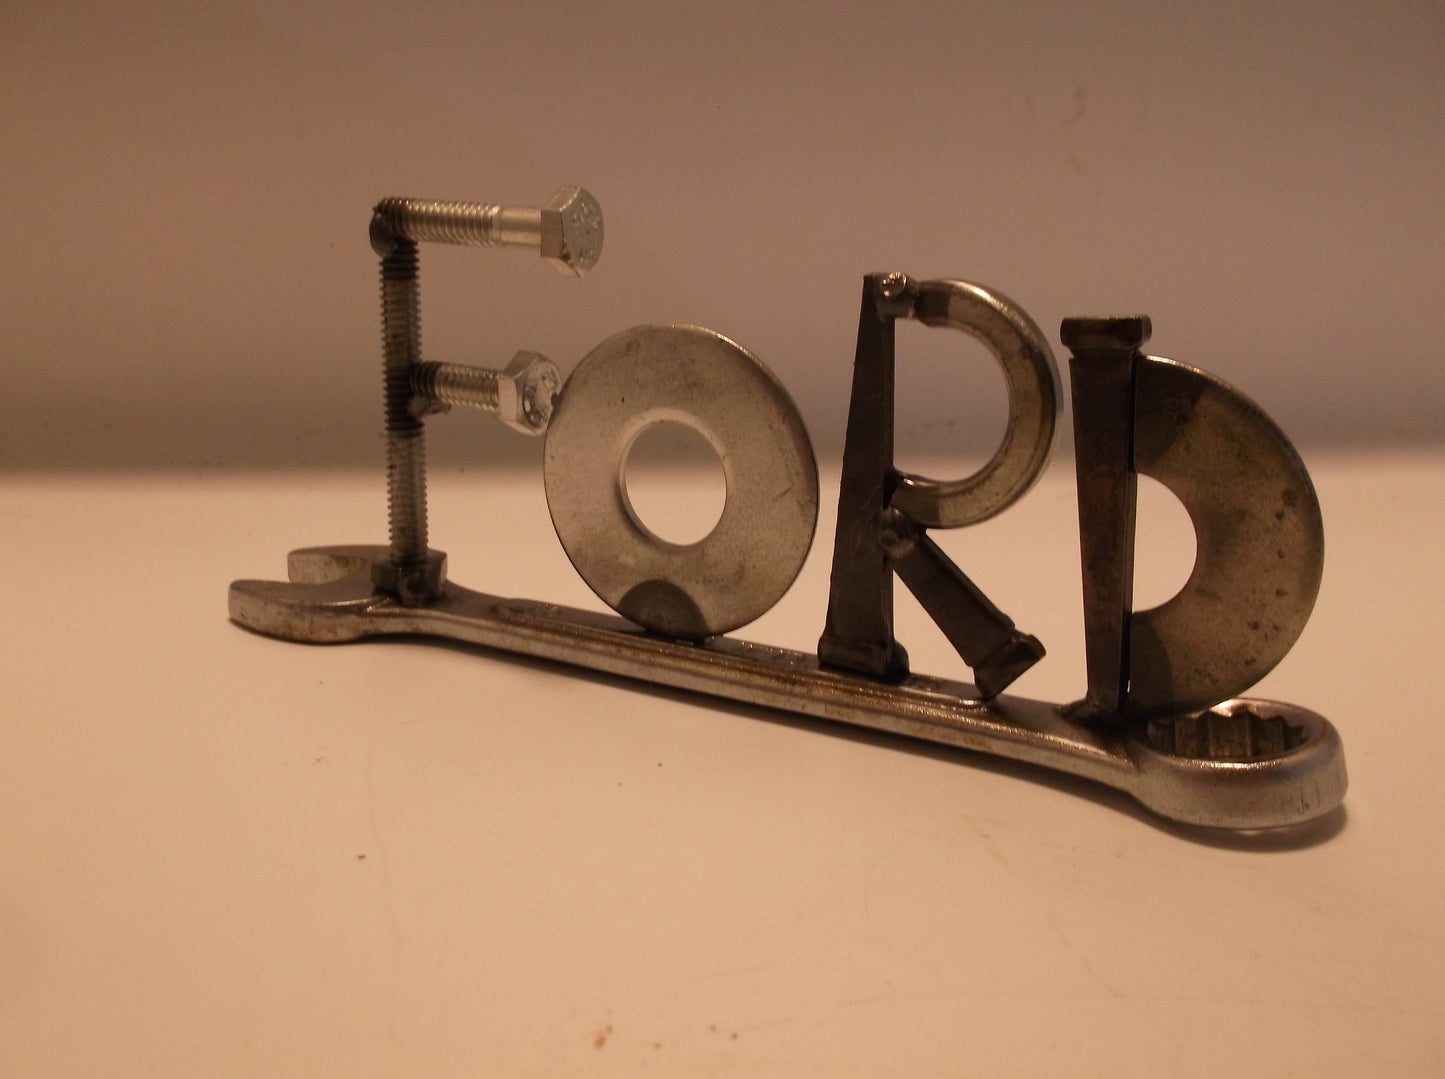 Ford, Miniature Auto wrench gift, Upcycled Letter Art, welded metal art